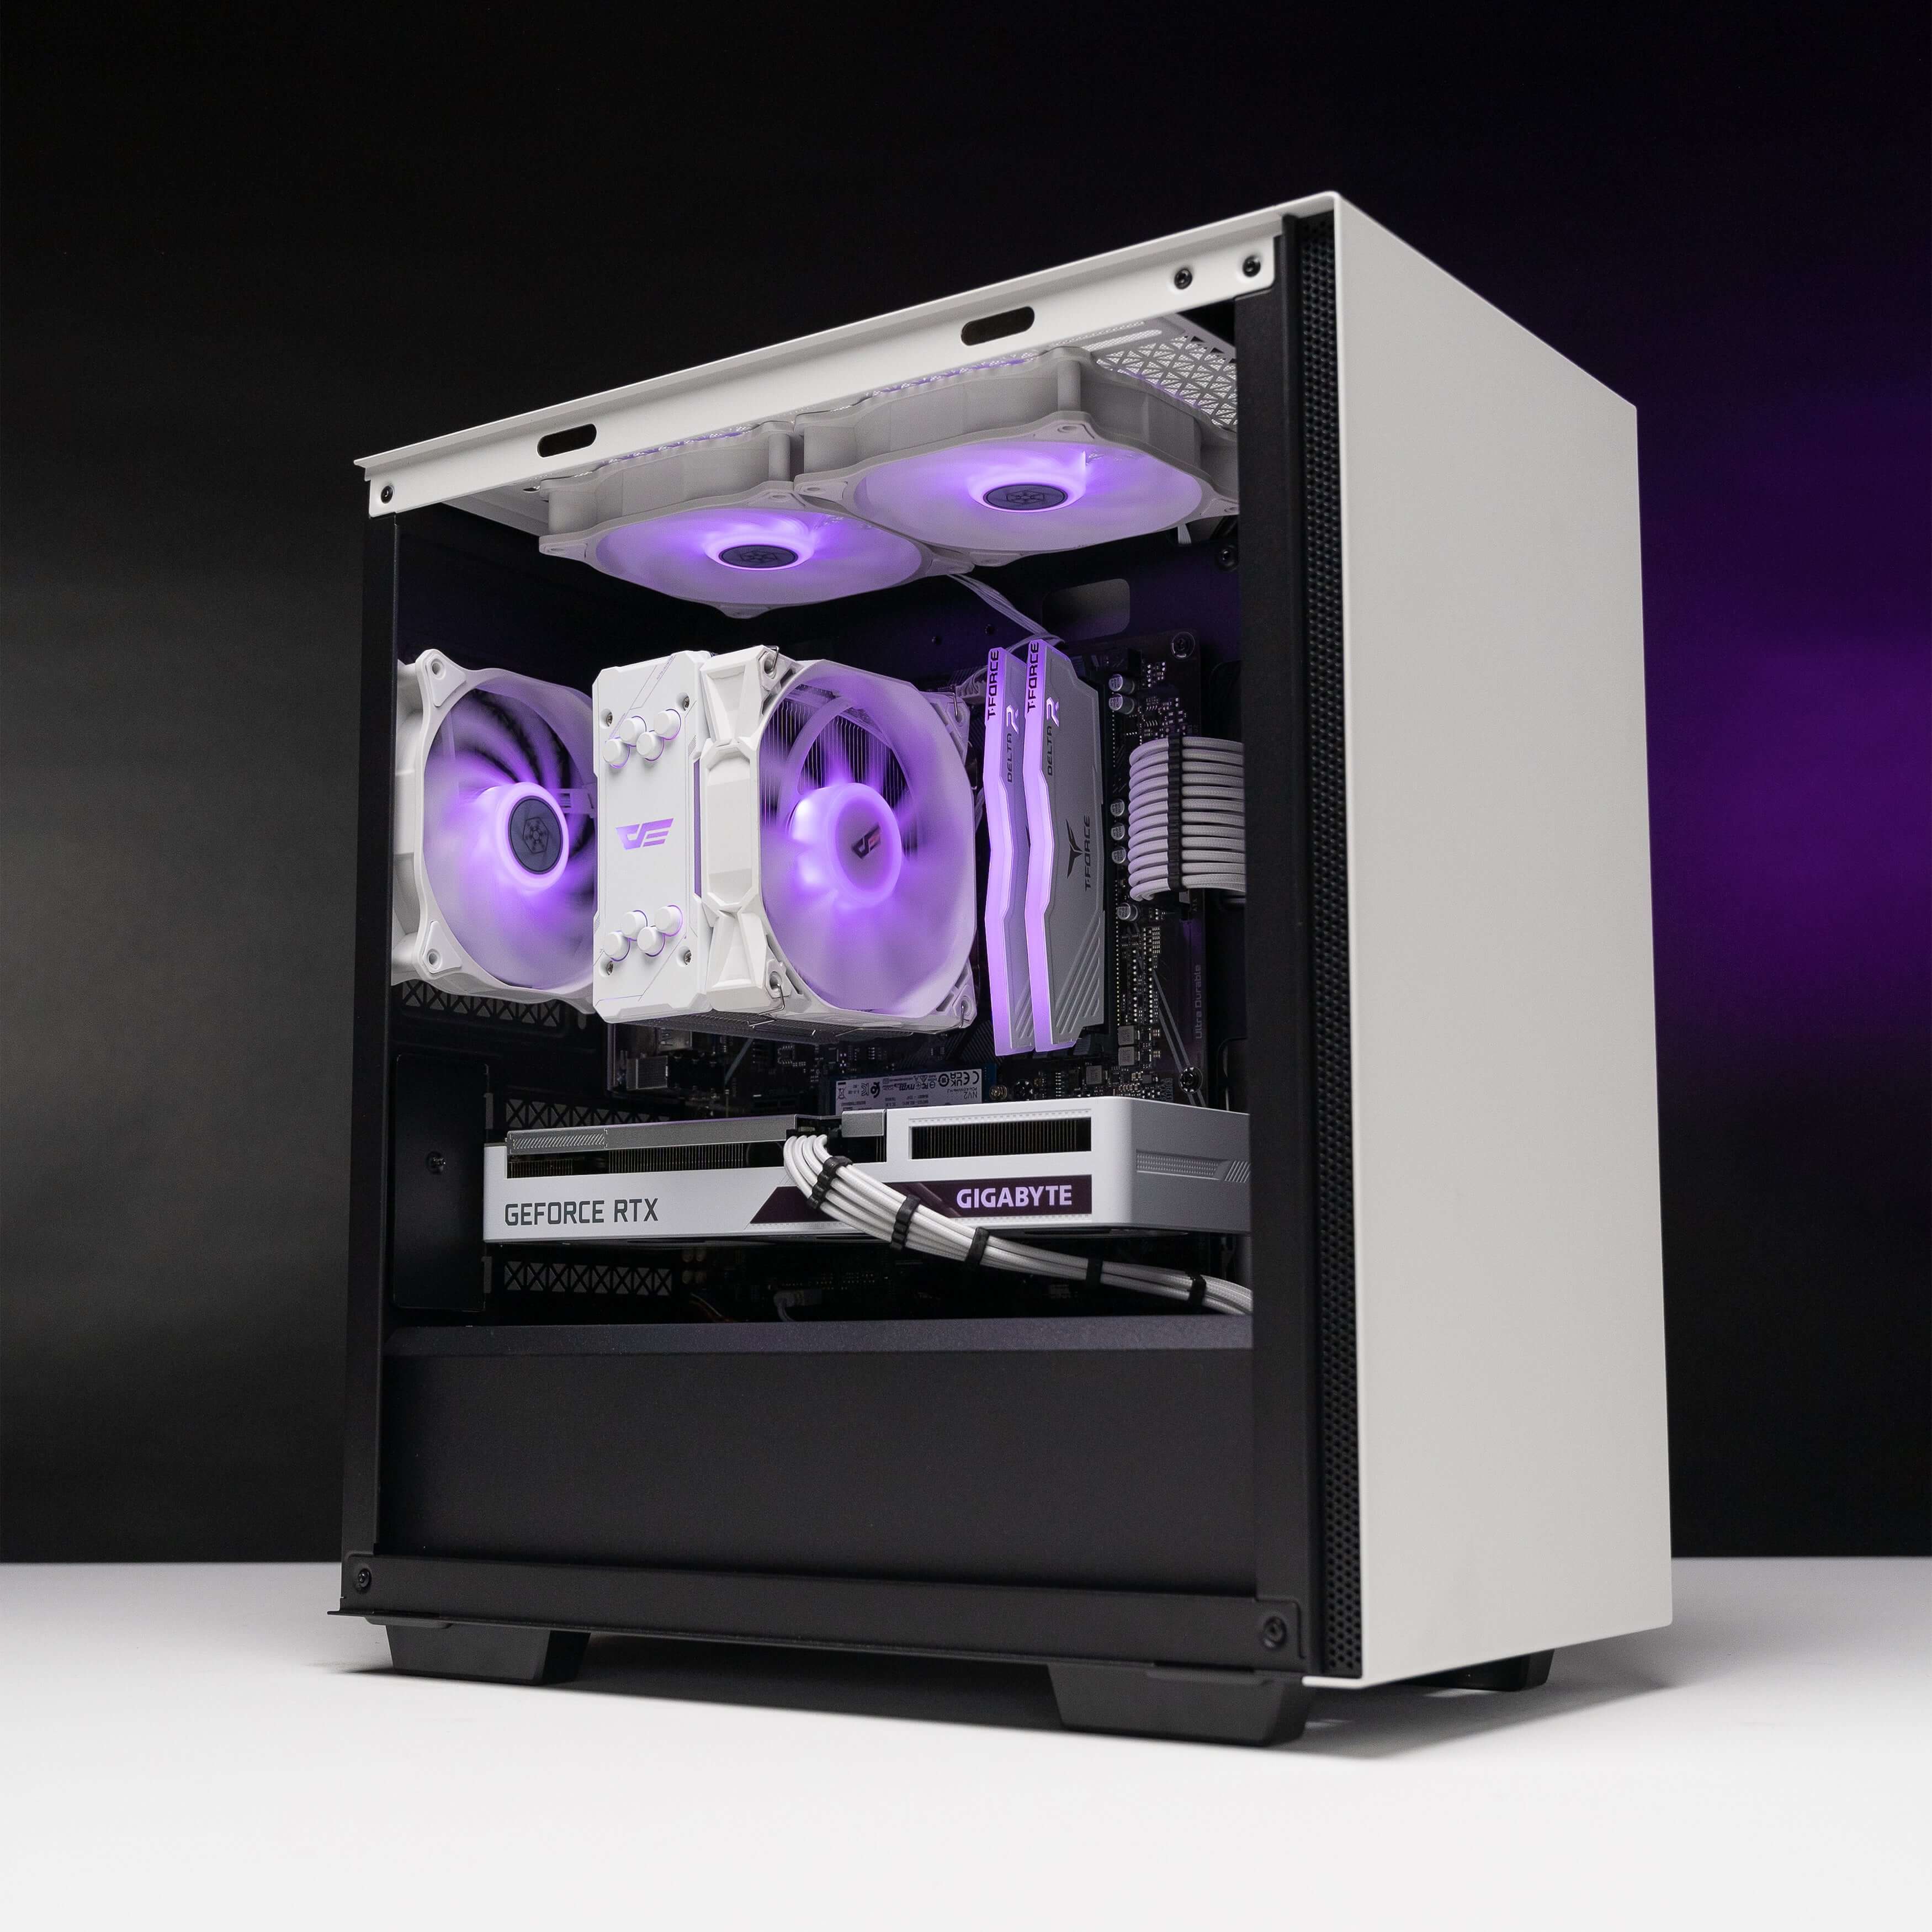 Collection of Deep Freeze gaming PCs with advanced cooling solutions and impressive performance